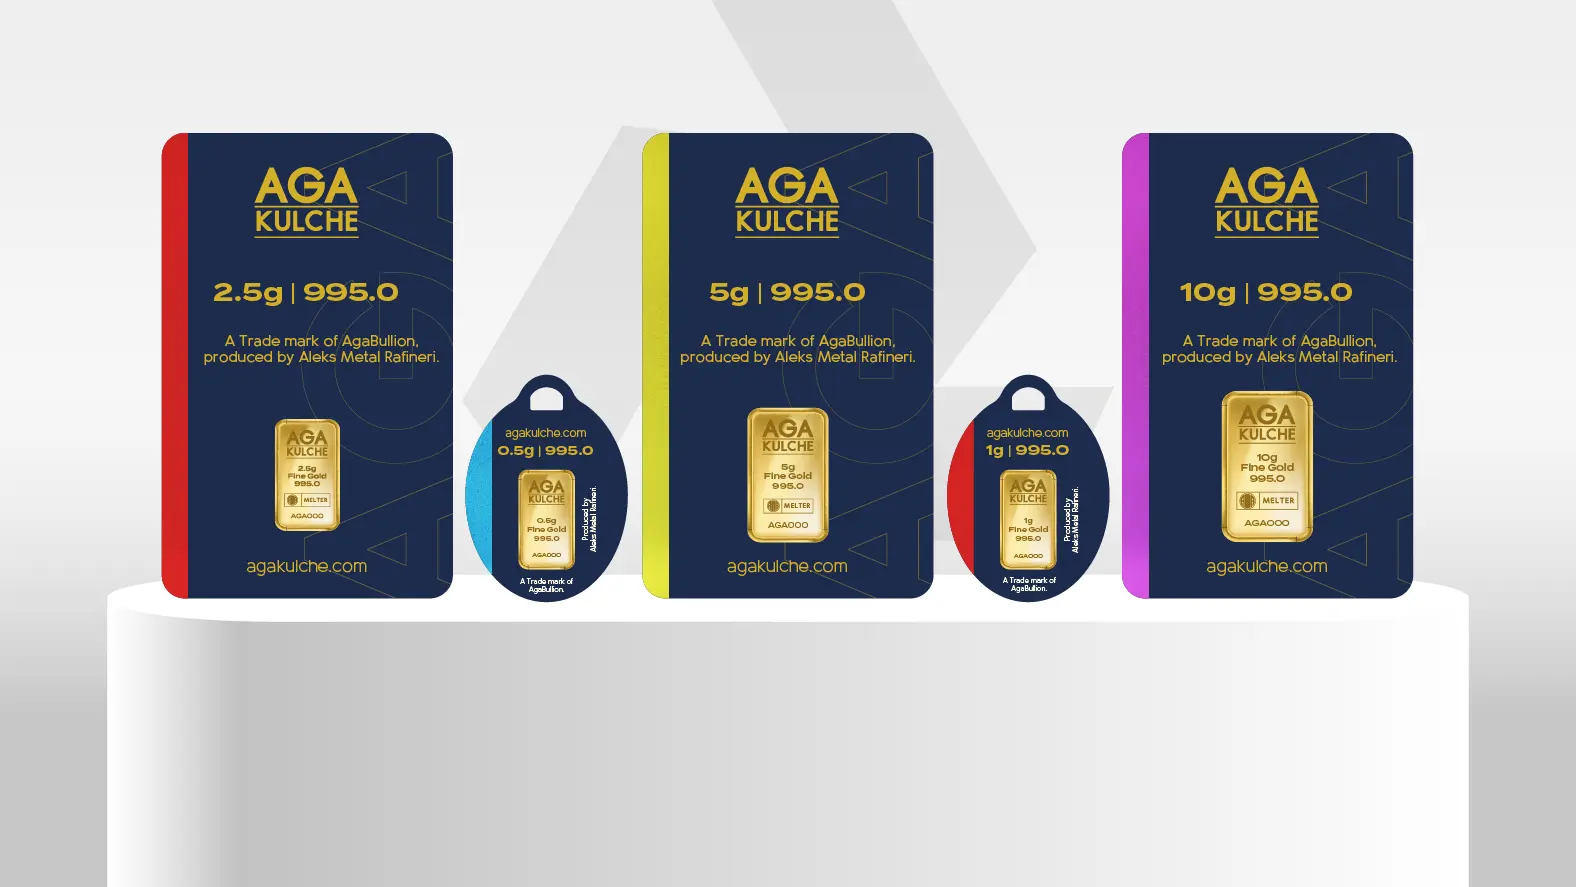 "Ensuring Trust and Quality in Your Online Gold Orders